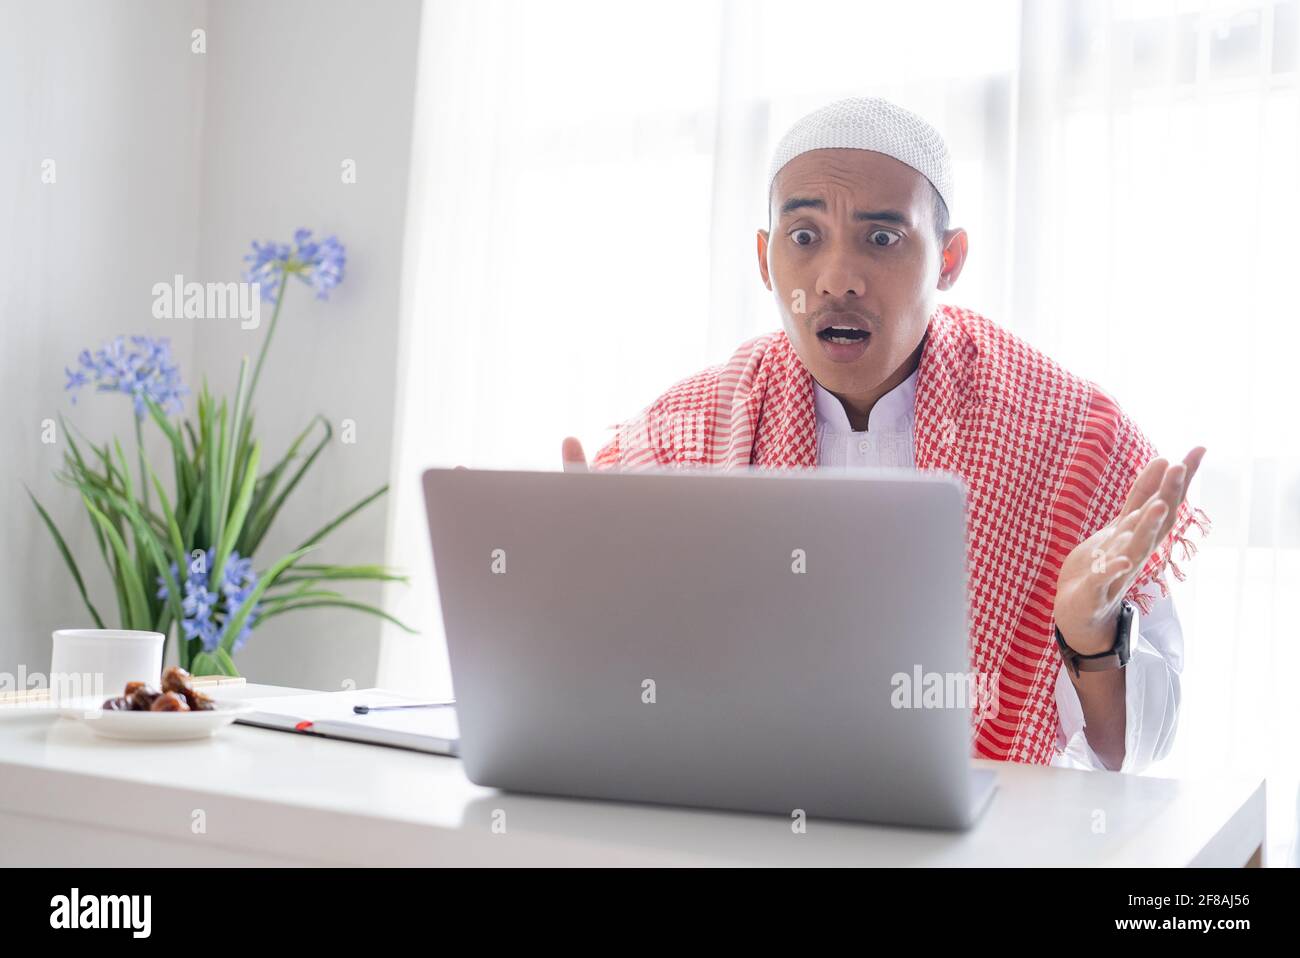 confuse asian muslim business man using laptop Stock Photo